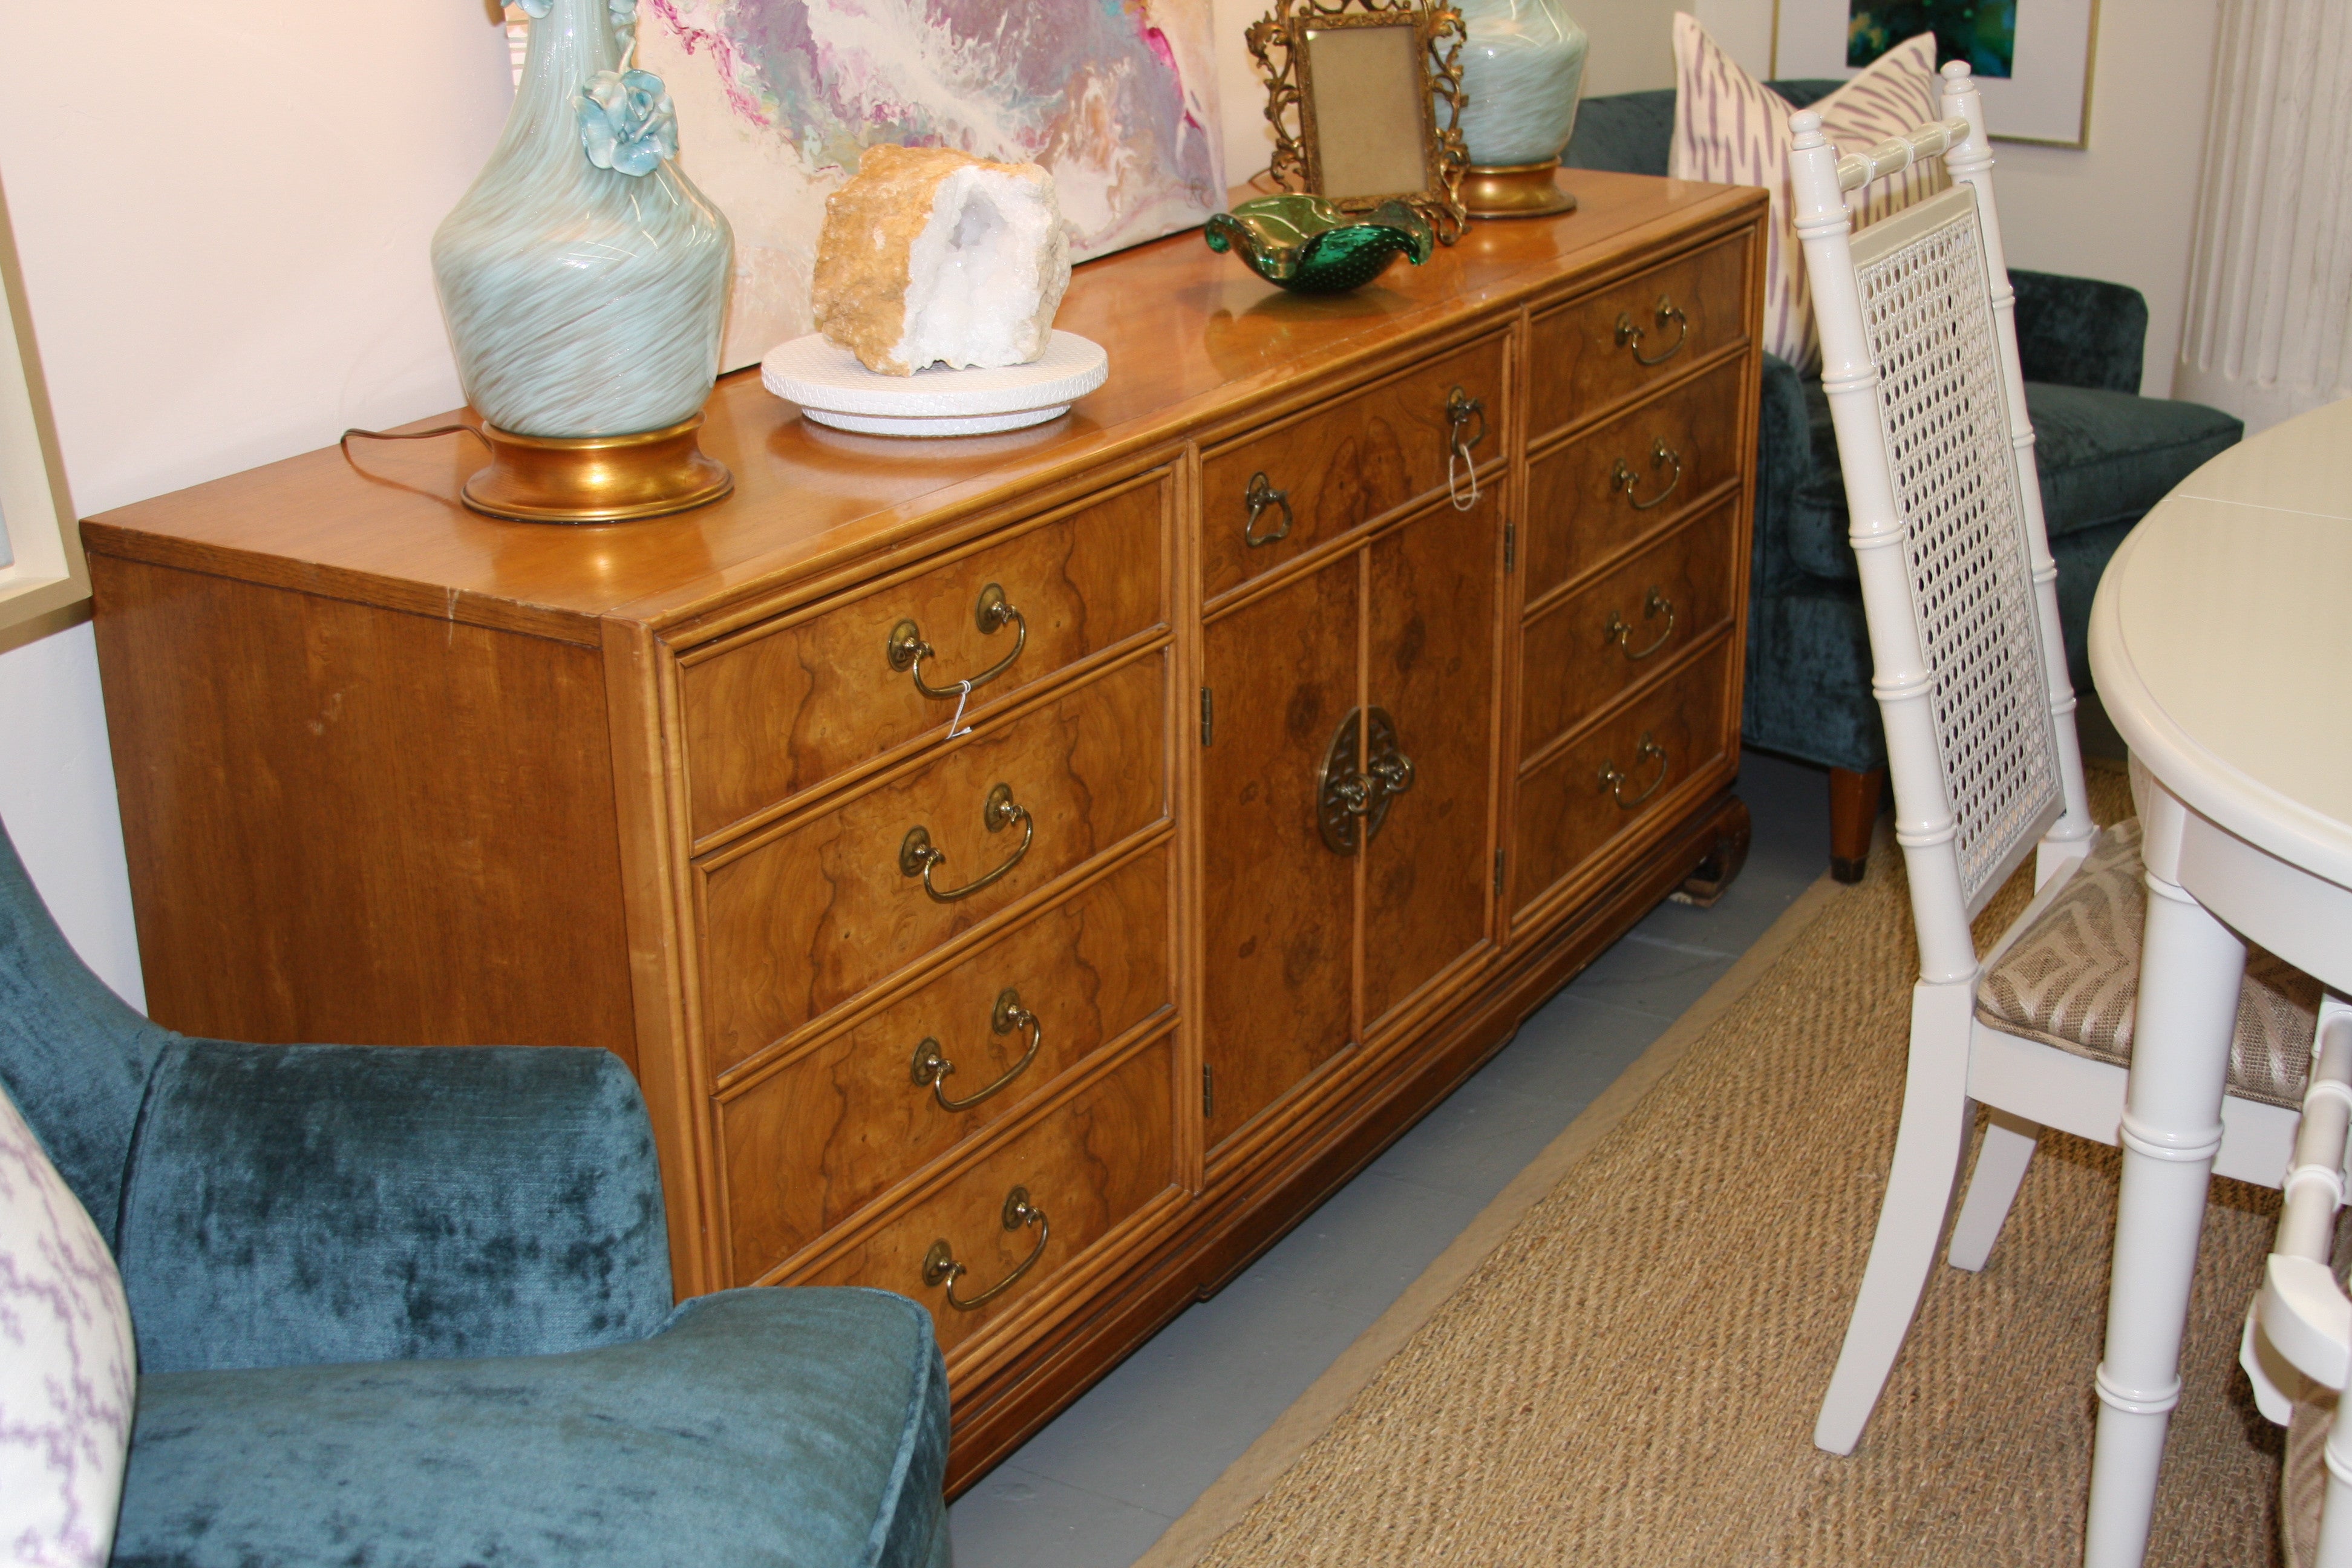 SOLD! Dresser| console| Tv console| credenza| purple| vintage dresser|  home| 9 drawer| entryway| lacquer| customizable